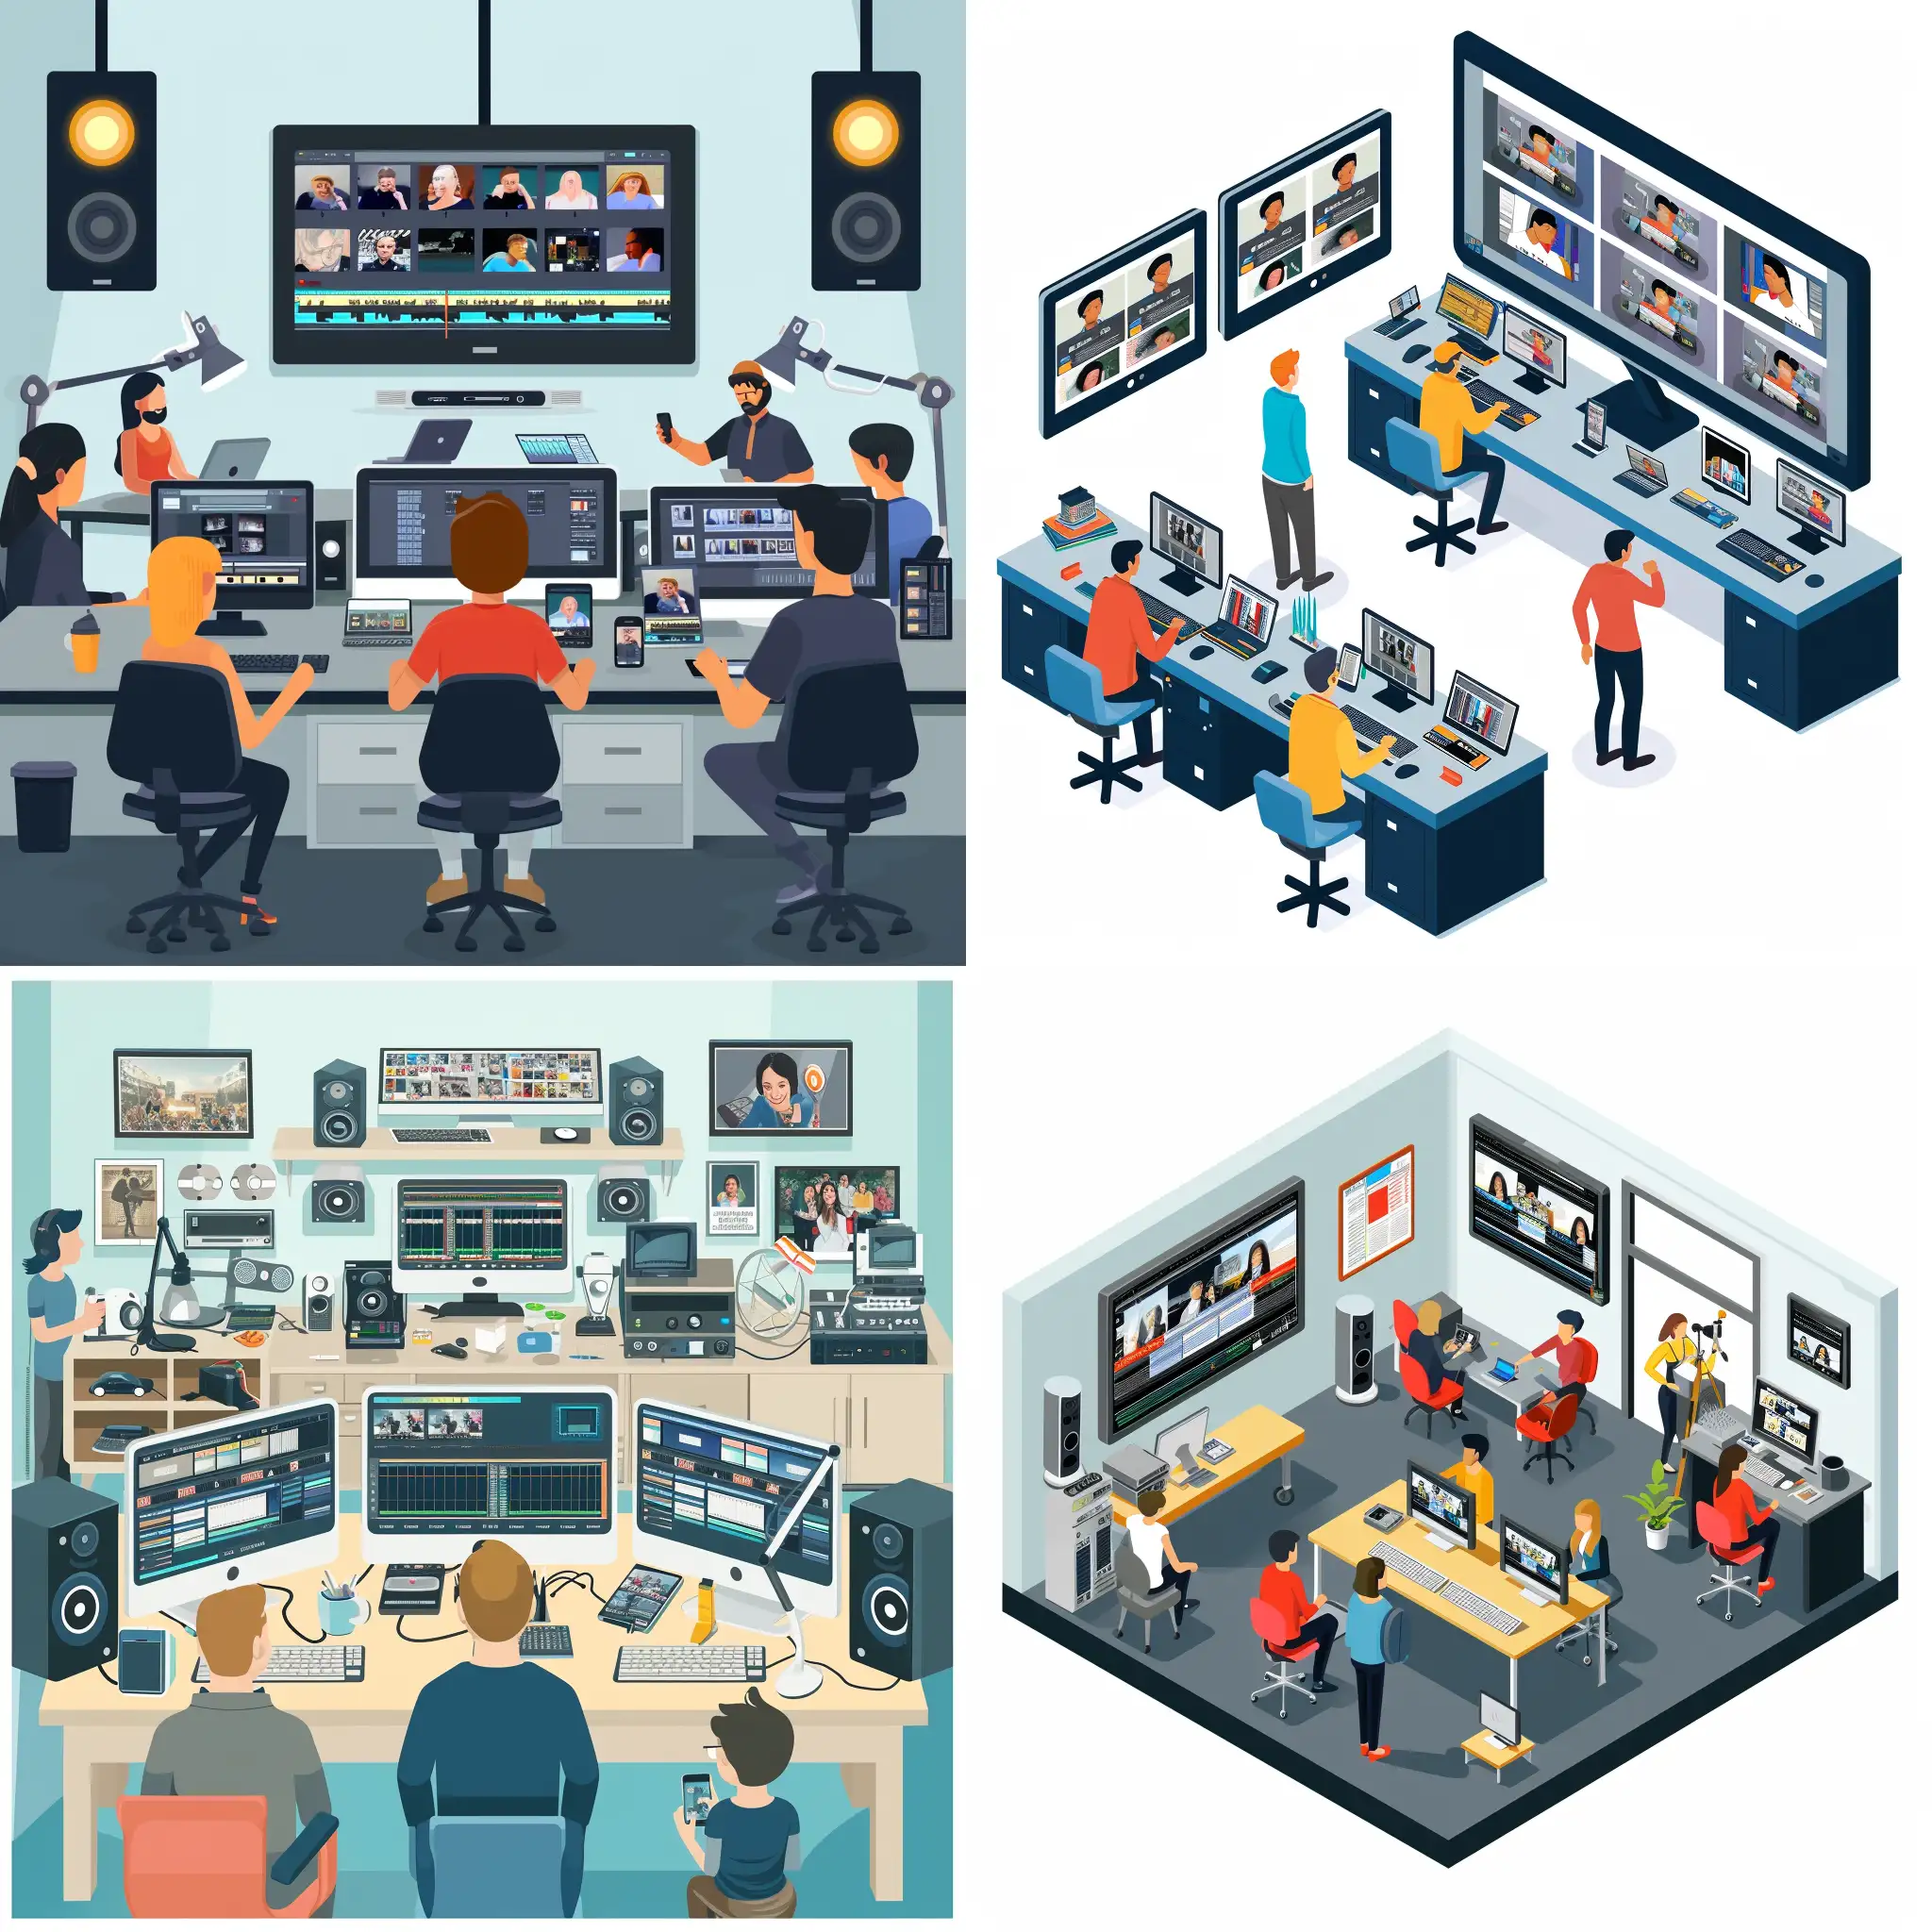 Television-Editing-Room-with-People-Computers-and-Smartphones